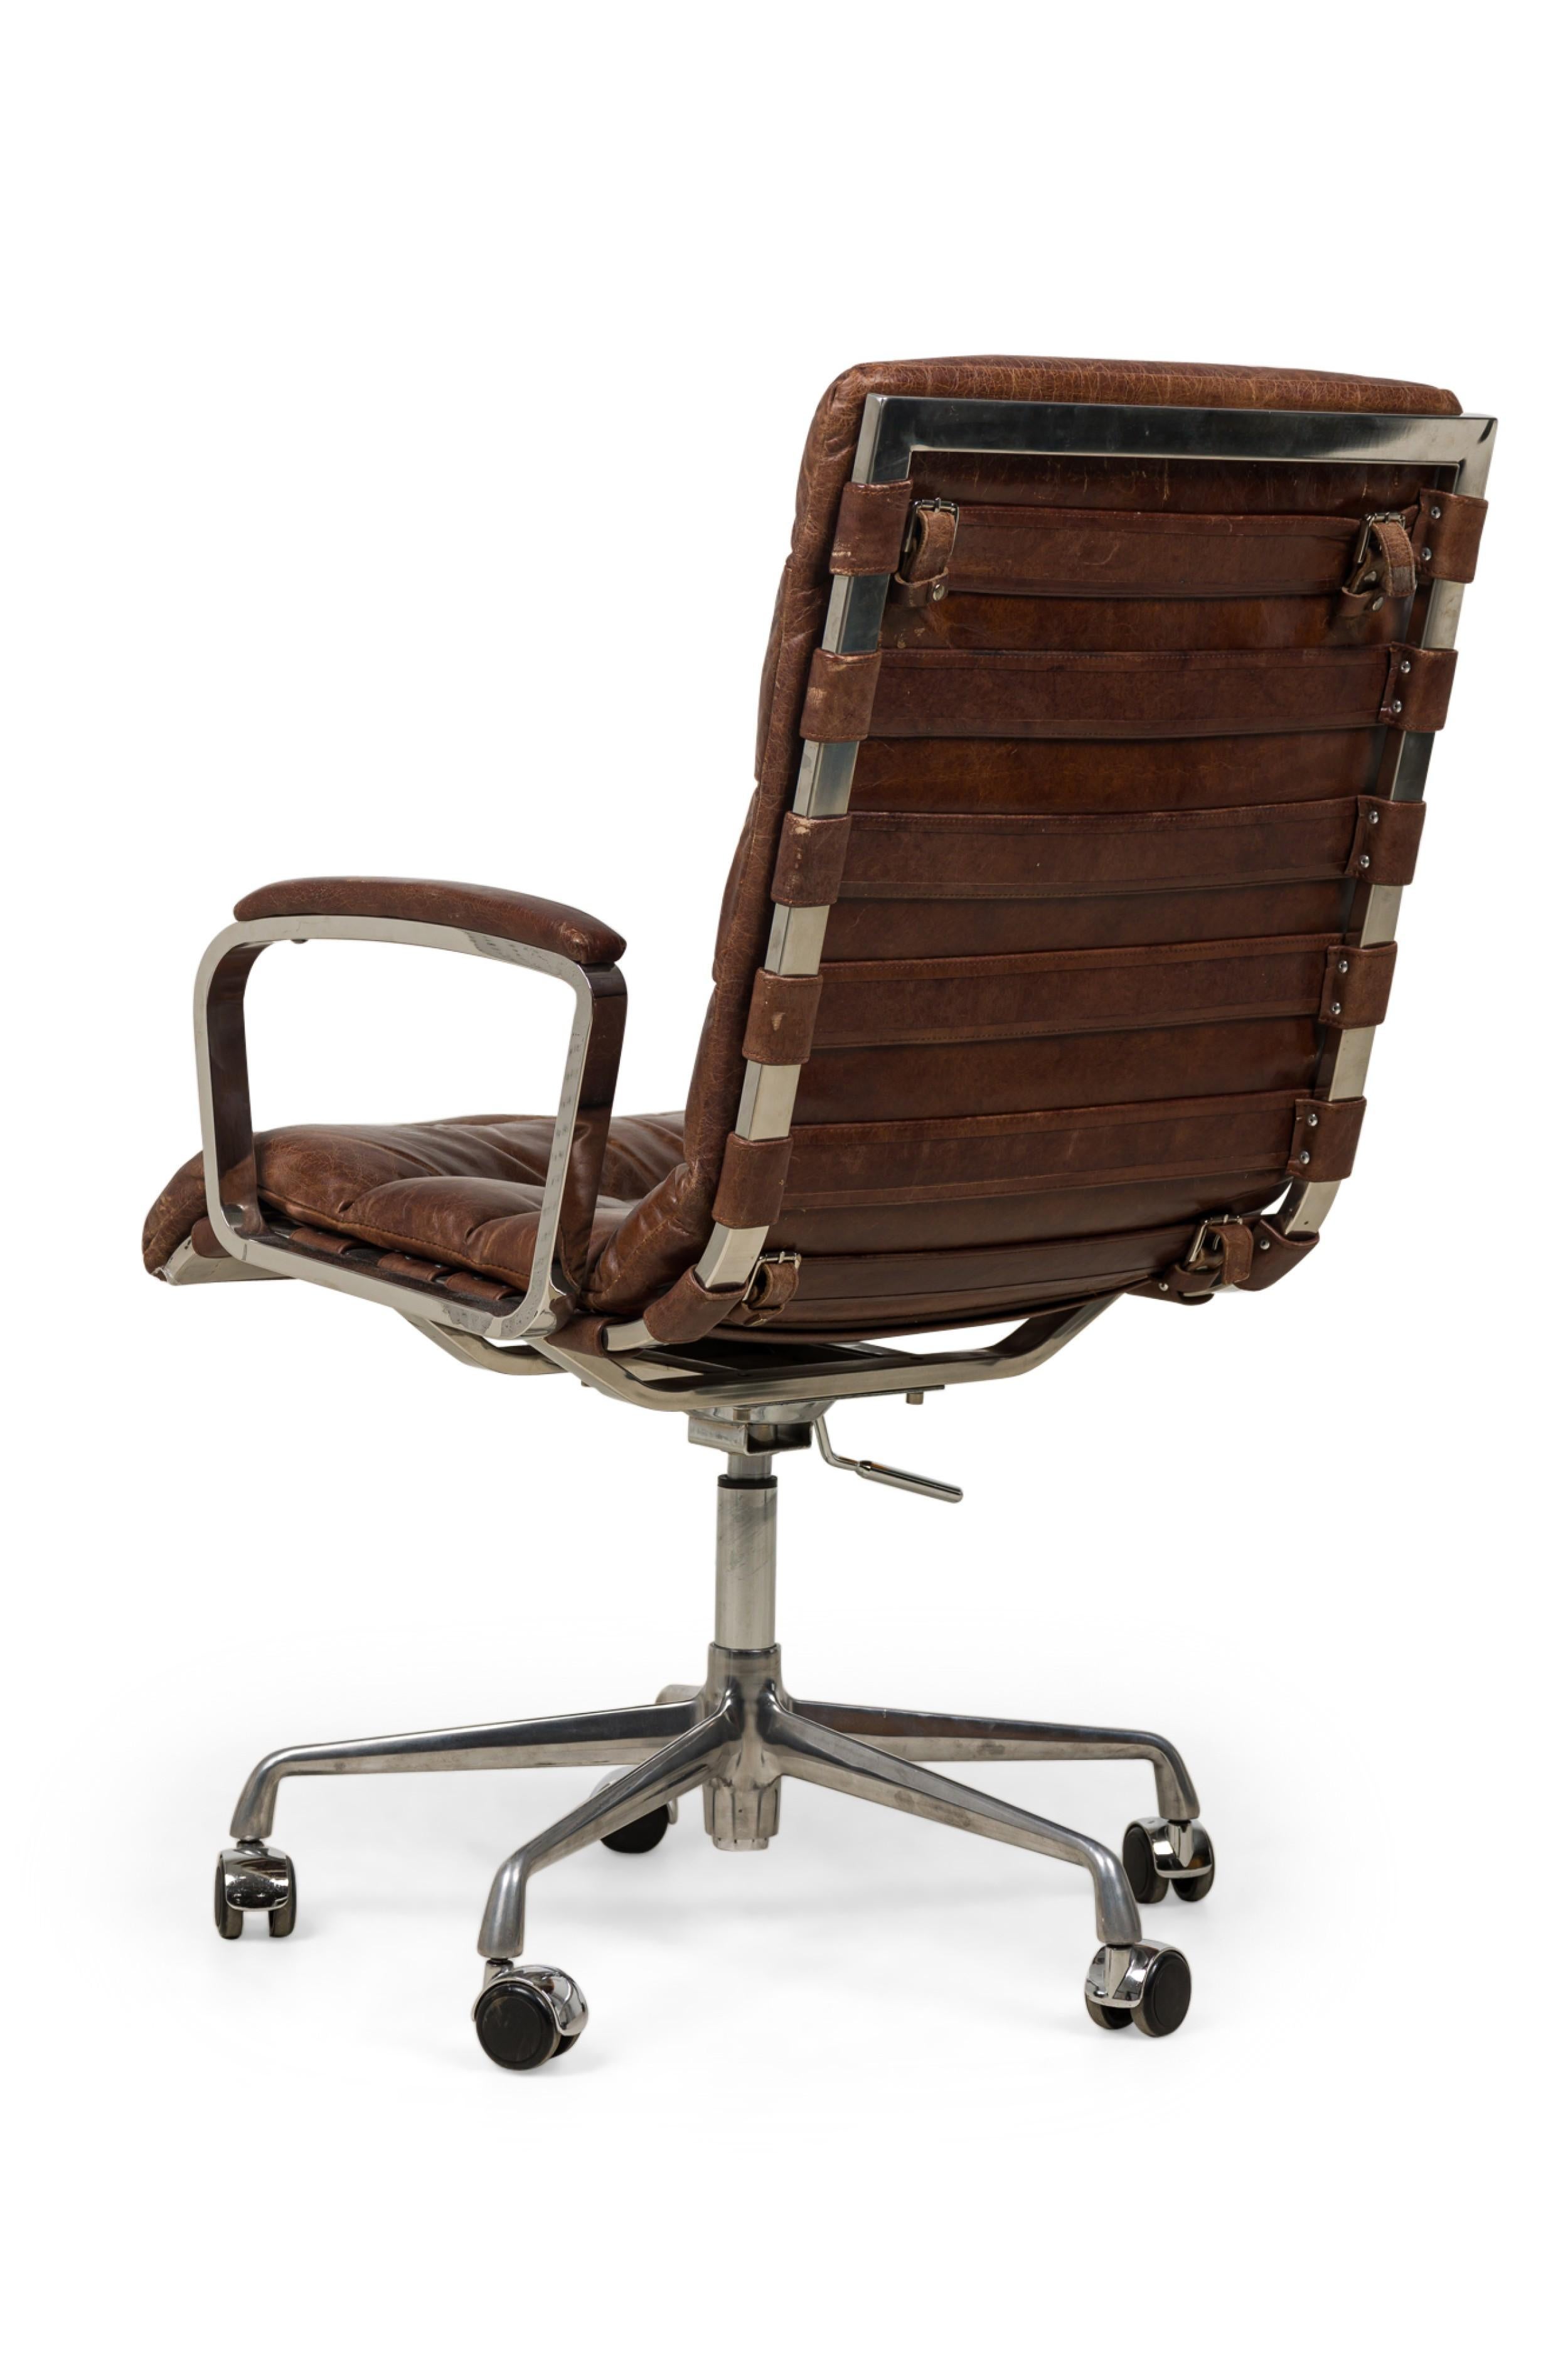 Mid-Century American-Style tufted brown leather upholostered swivel / desk chair in channeled brown leather upholstery with a cantilevered chrome frame featuring height adjustment and belted leather support straps, resting on a starburst base with 5